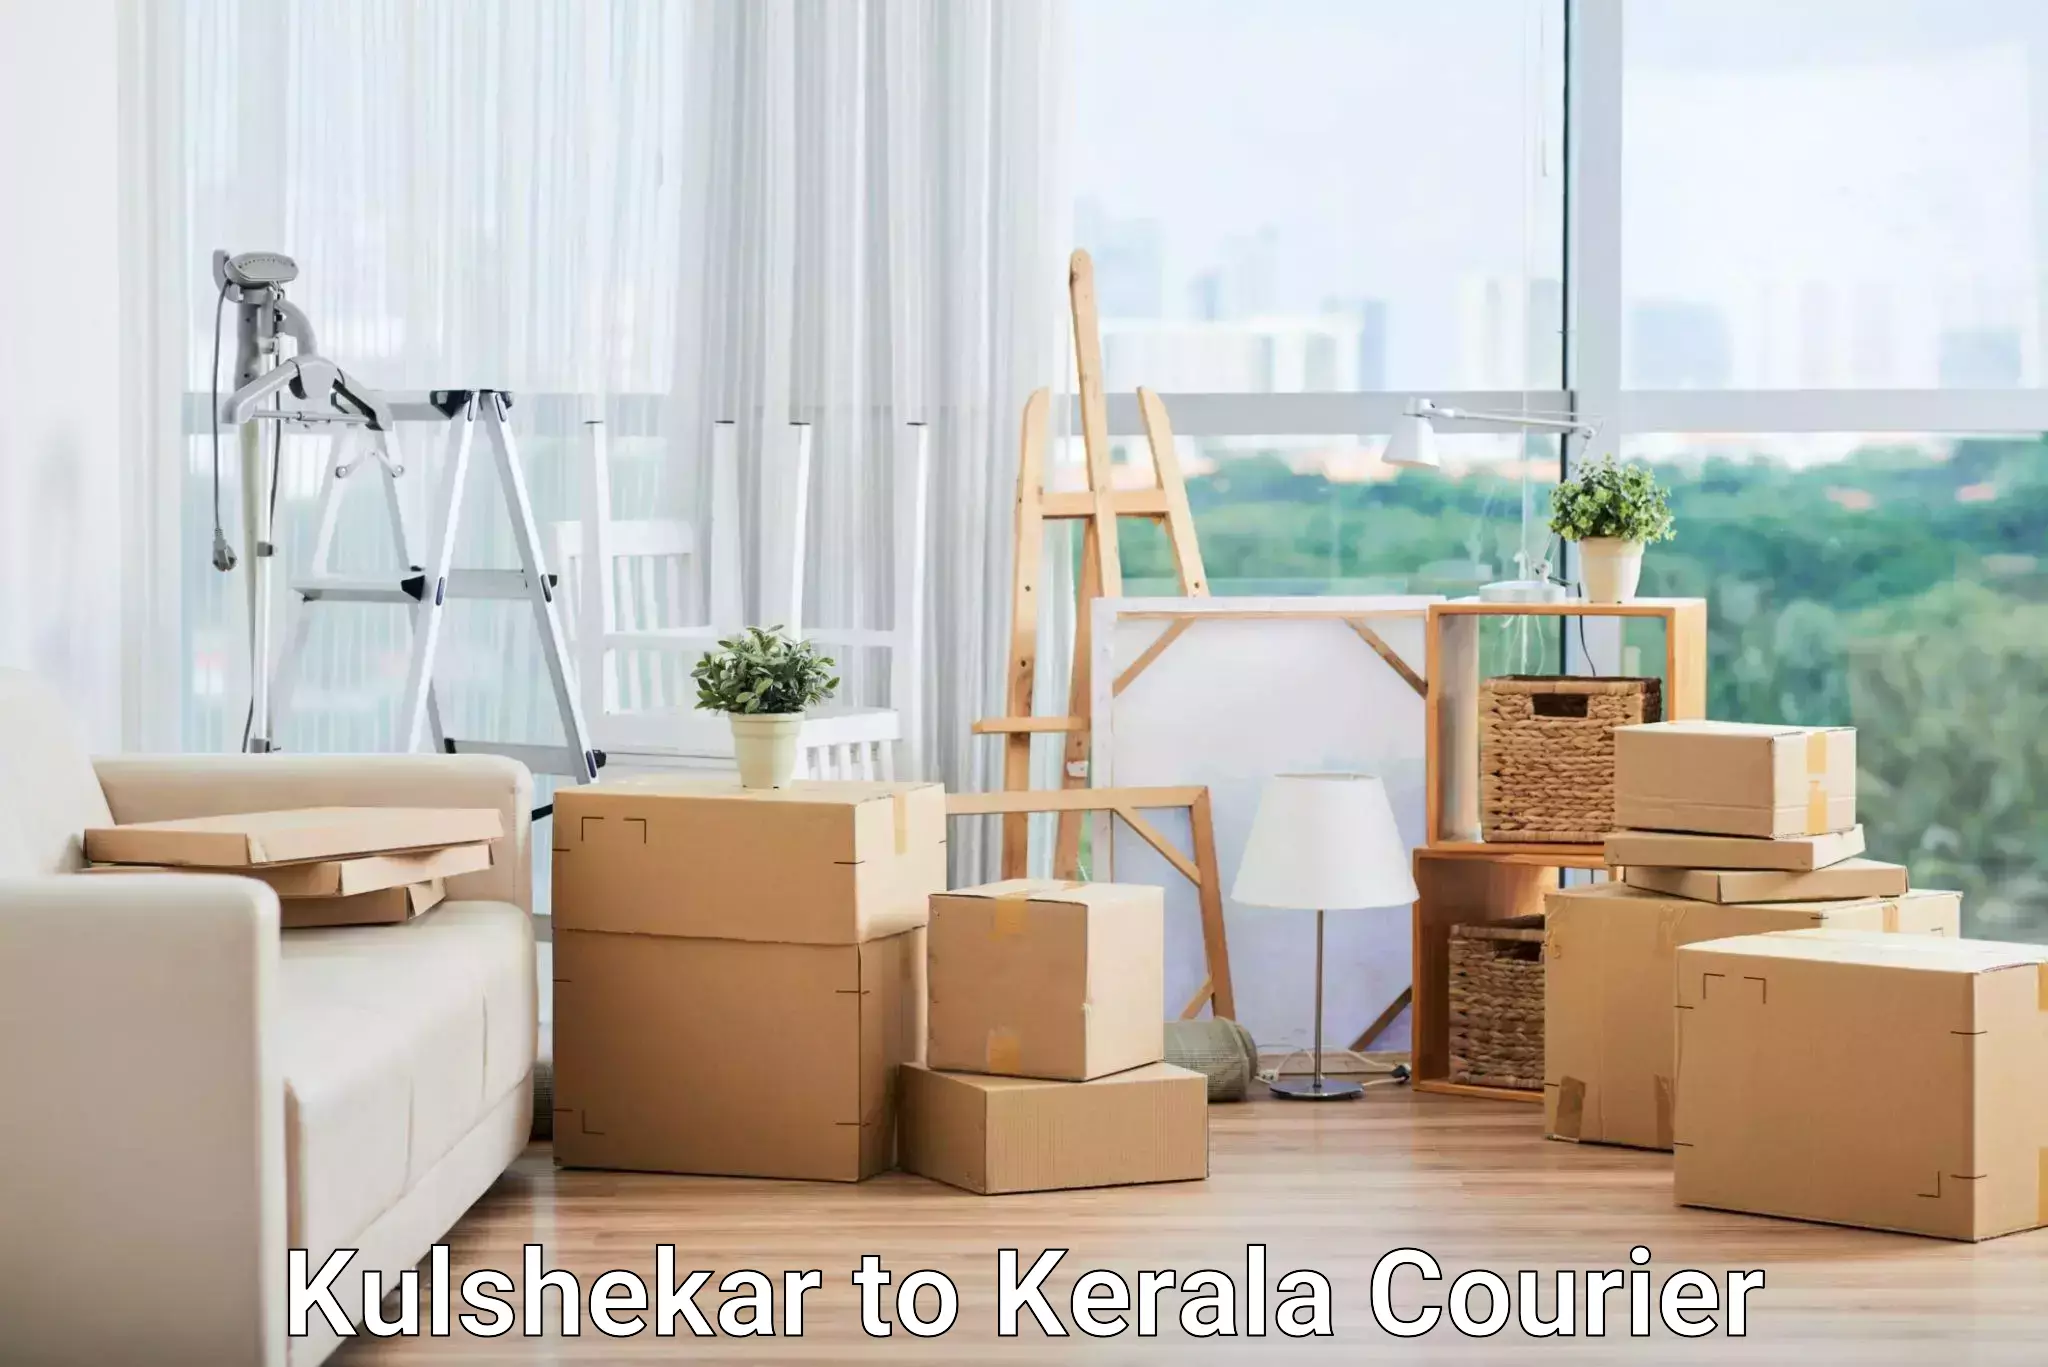 Premium courier solutions Kulshekar to Cochin University of Science and Technology